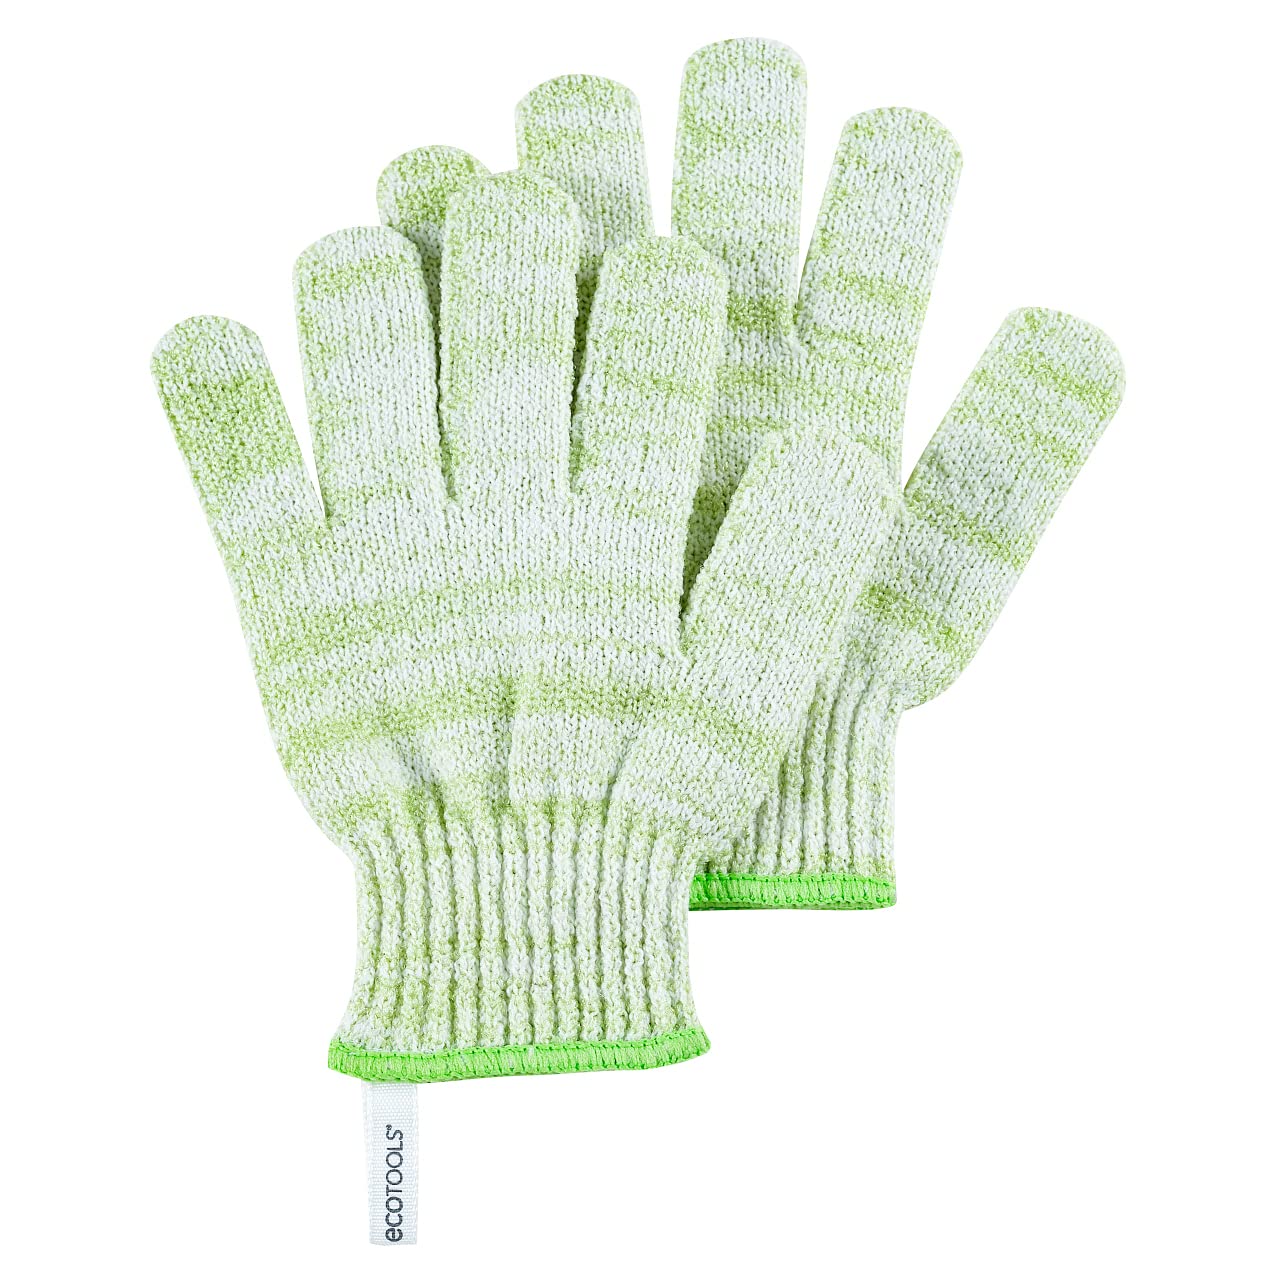 EcoTools Bath & Shower Gloves, Recycled Netting, Exfoliating, Gentle Cleansing for Whole Body, Fits All Hands, Green, 1 Pair